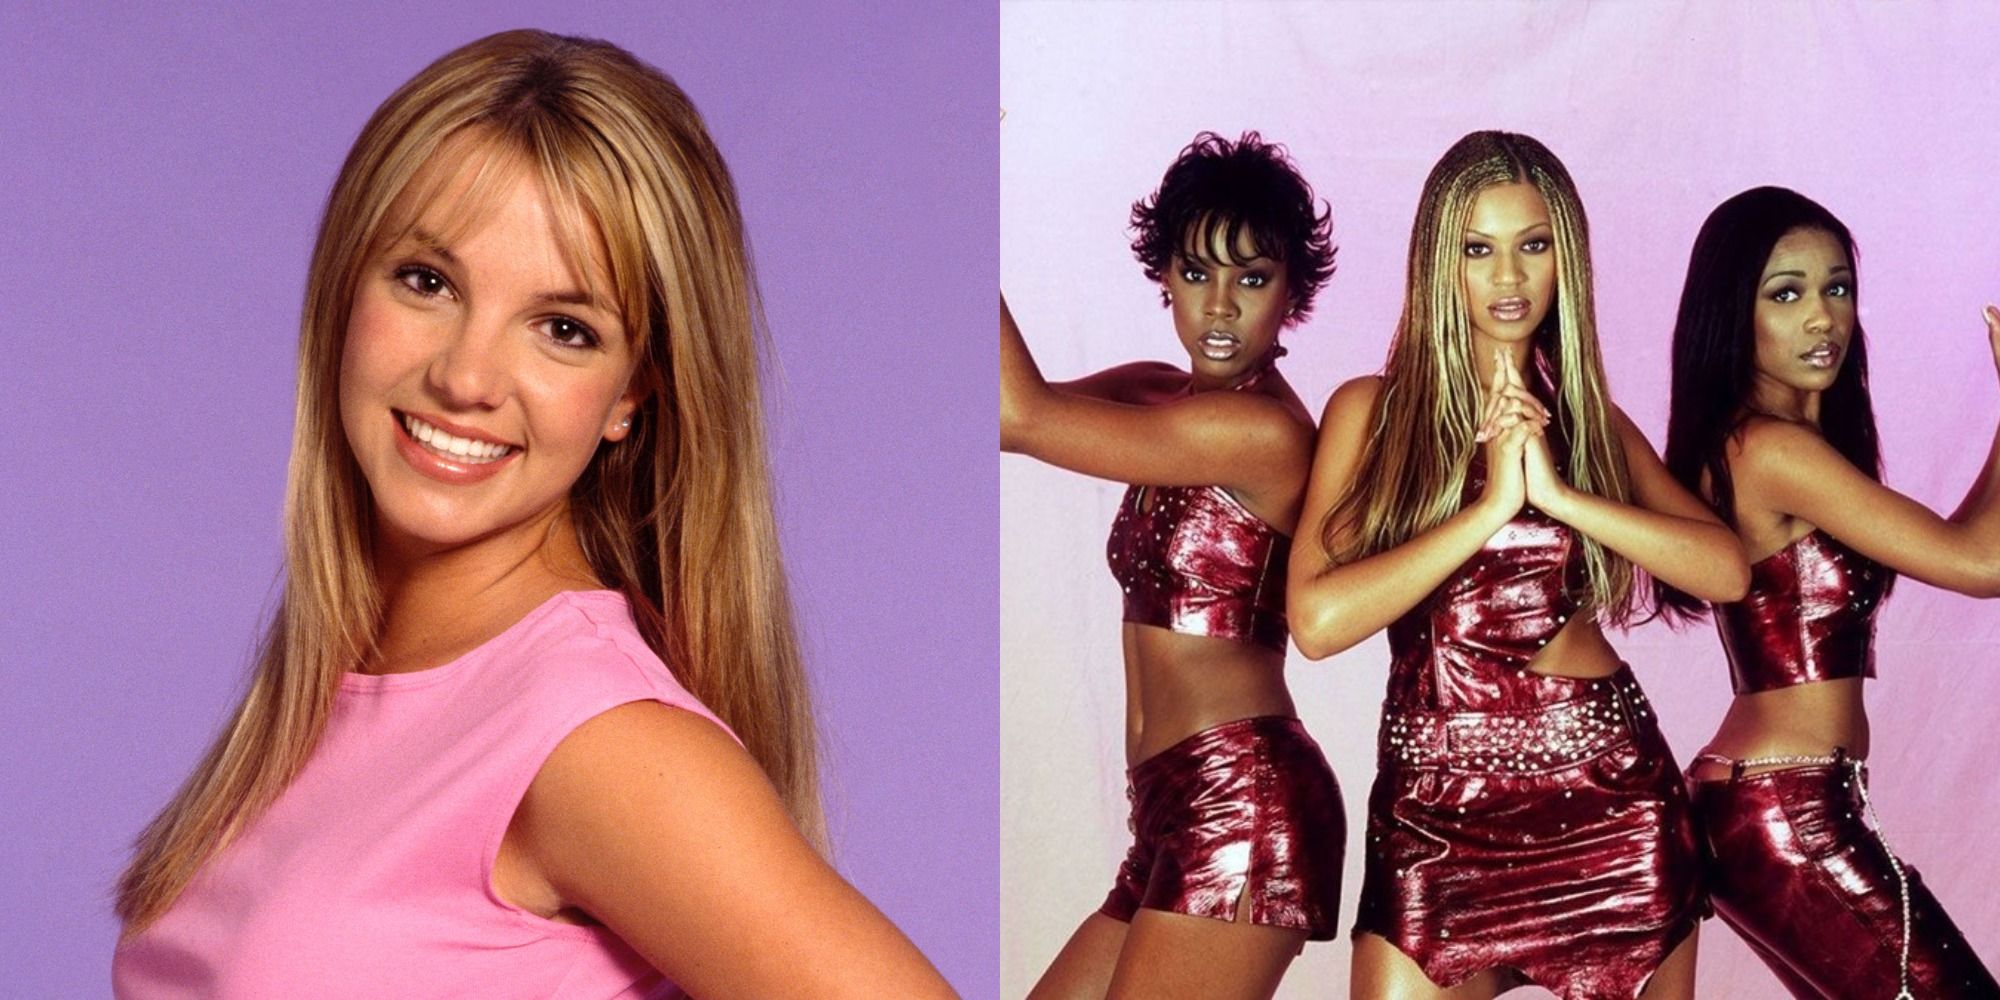 Split image showing Britney Spears and Destiny's Child.